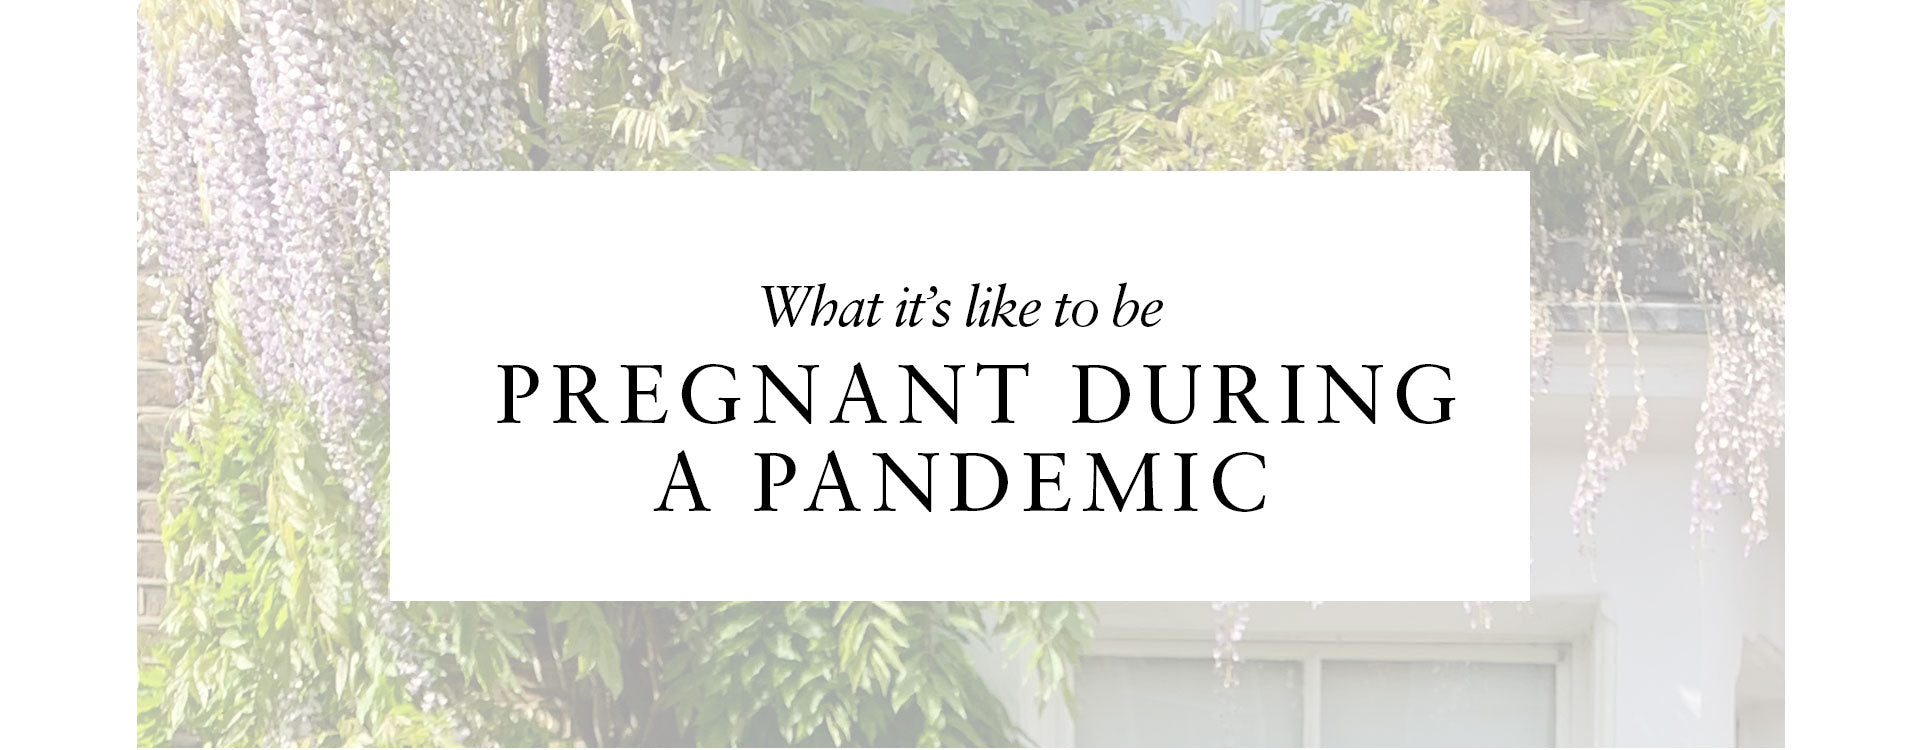 Pregnancy life during a pandemic